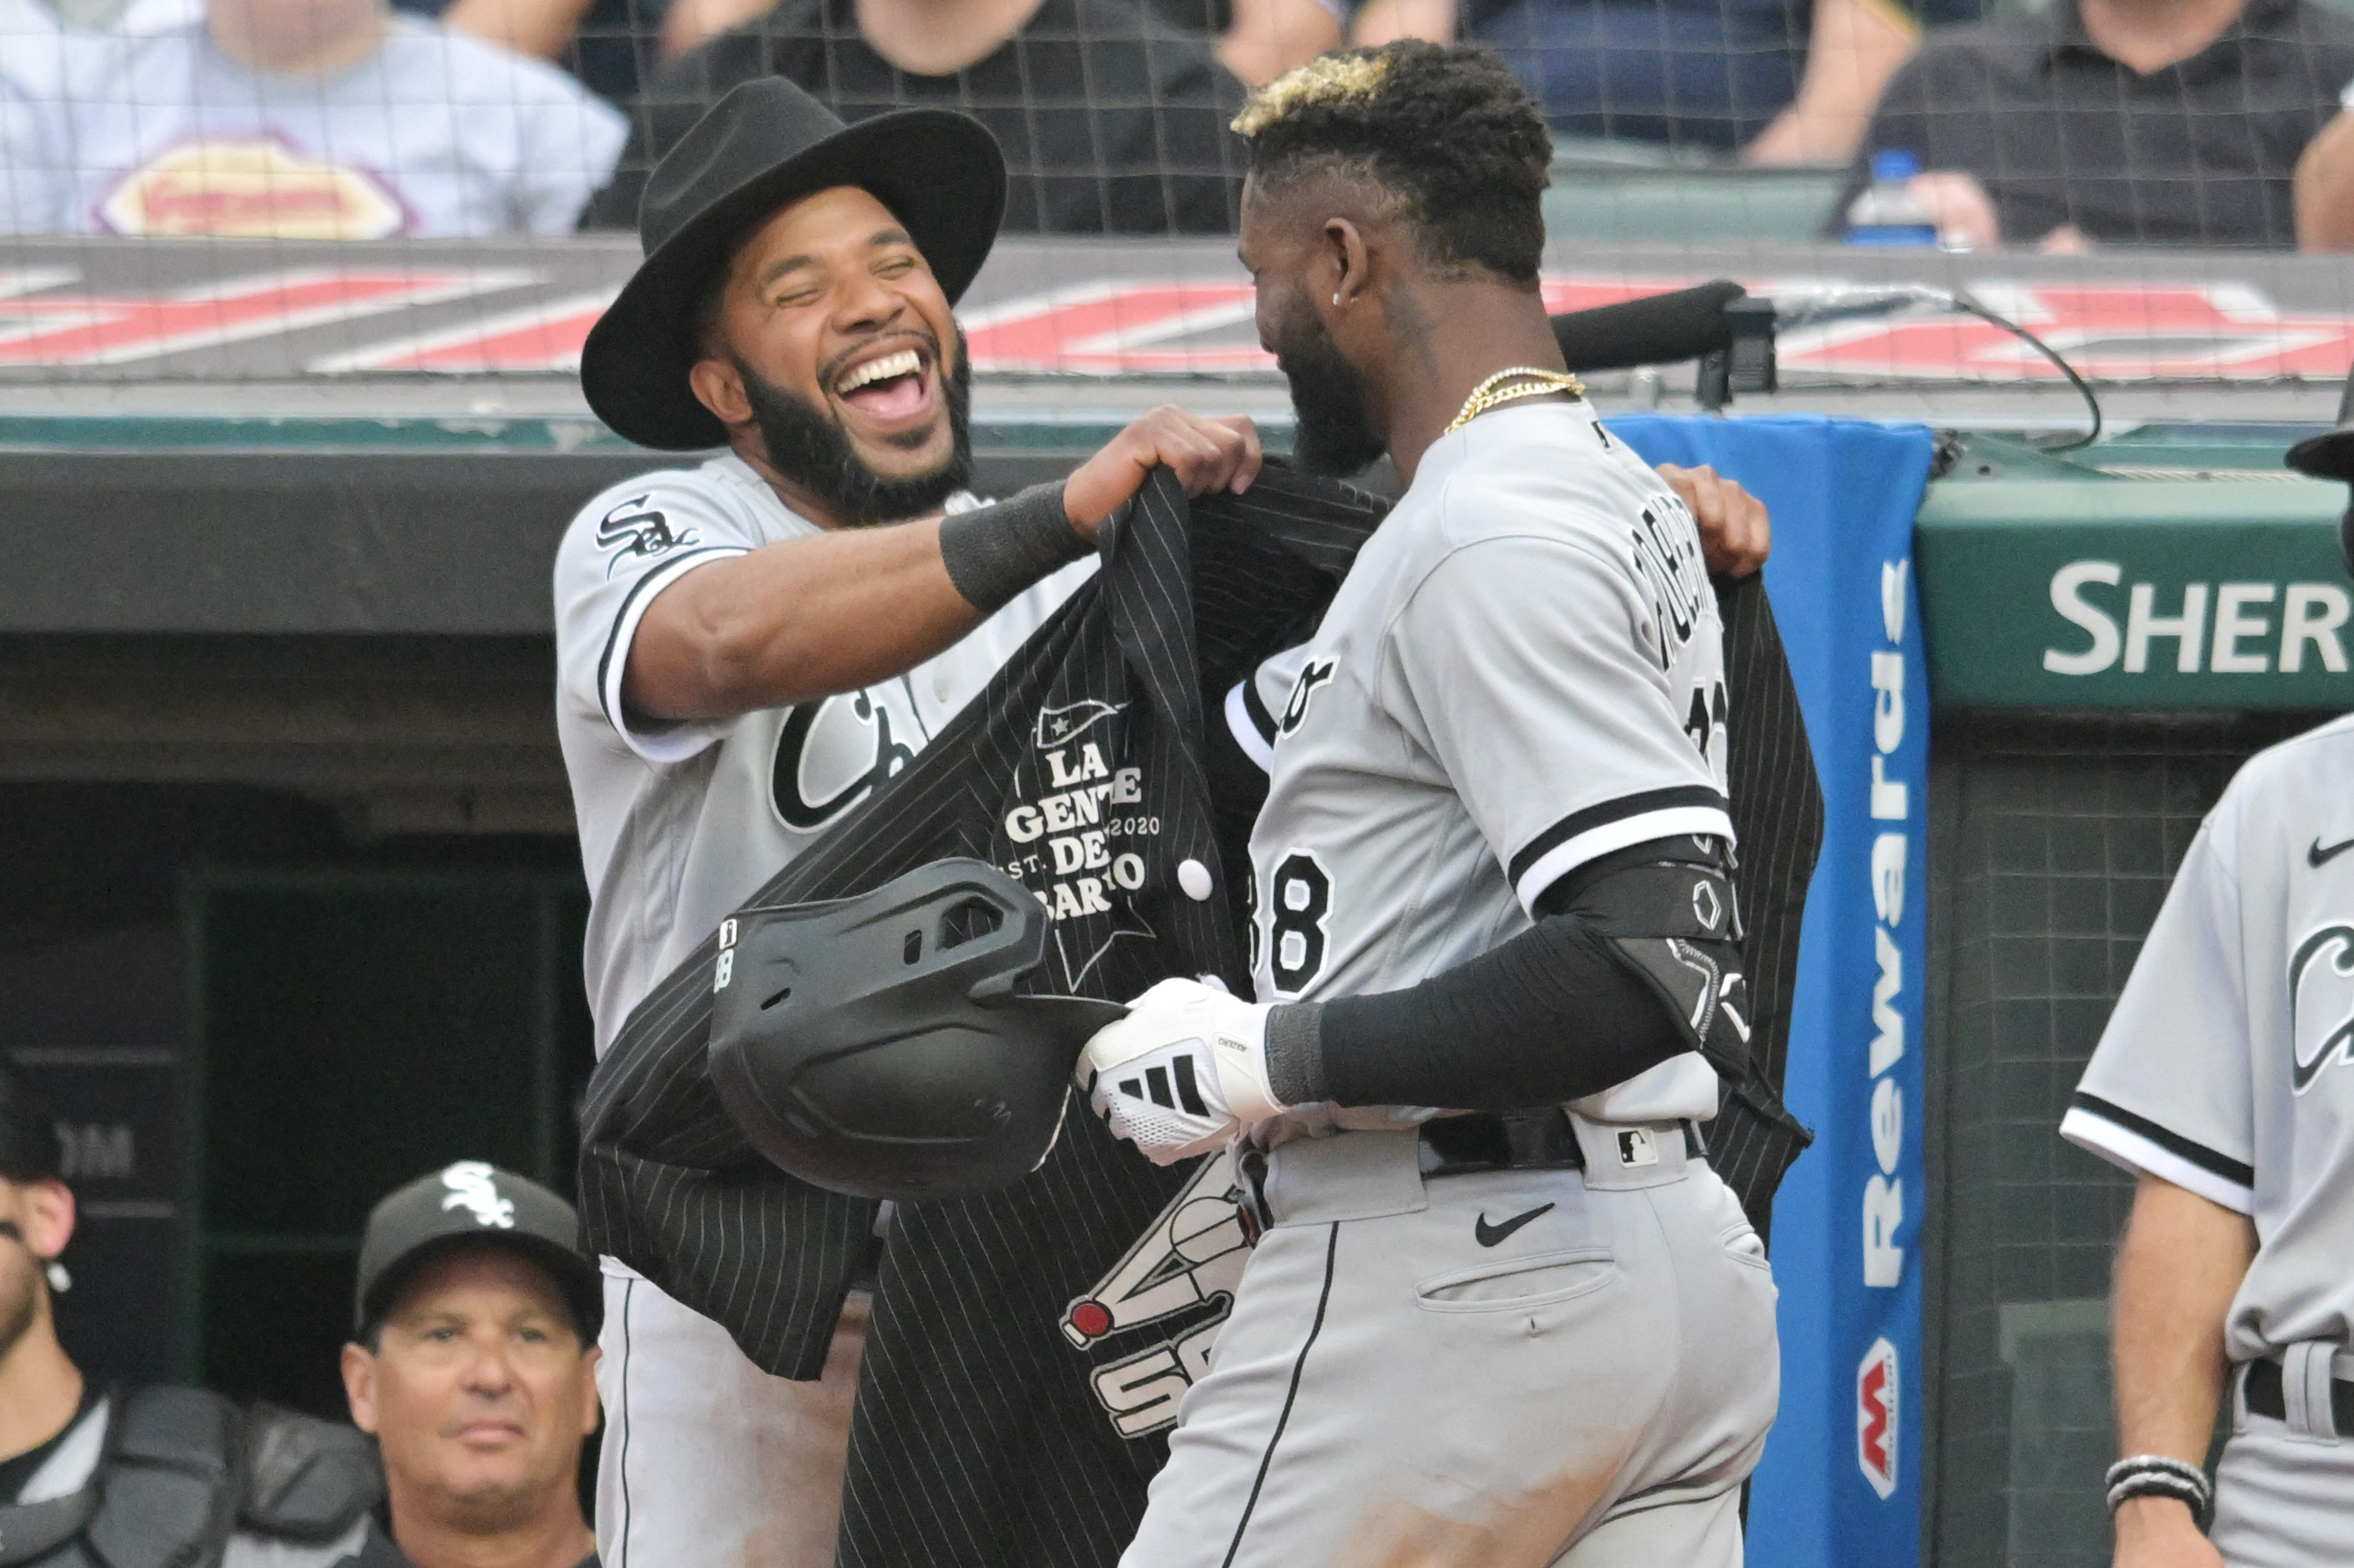 White Sox's win over Guardians marred by brawl, ejections